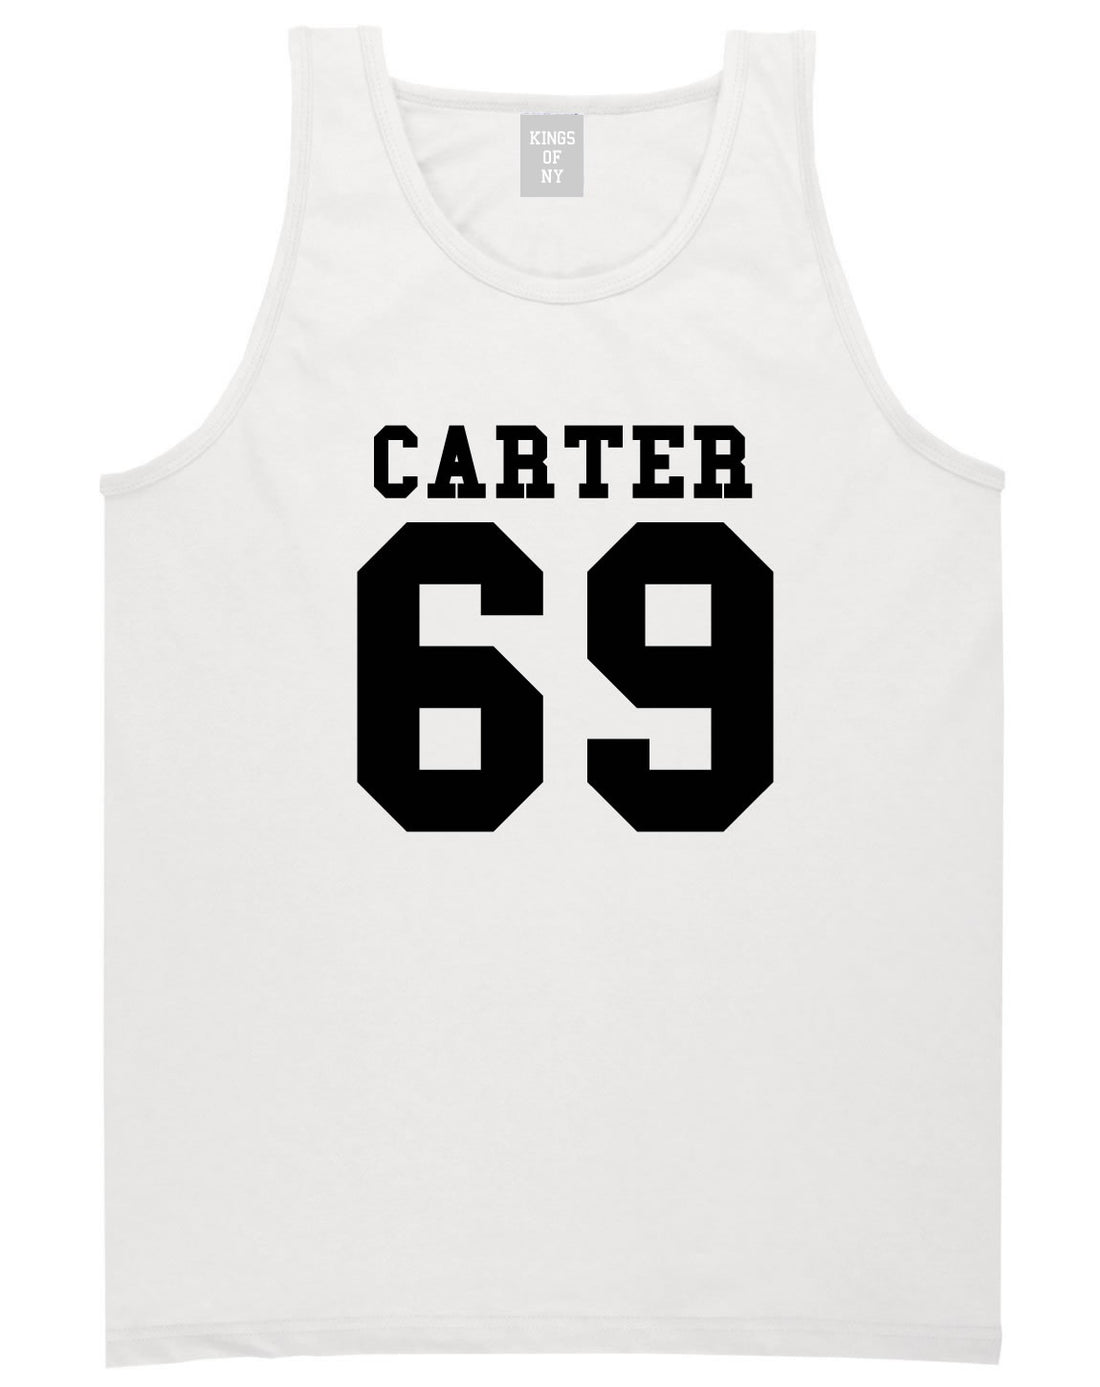  Carter 69 Team Tank Top in White by Kings Of NY